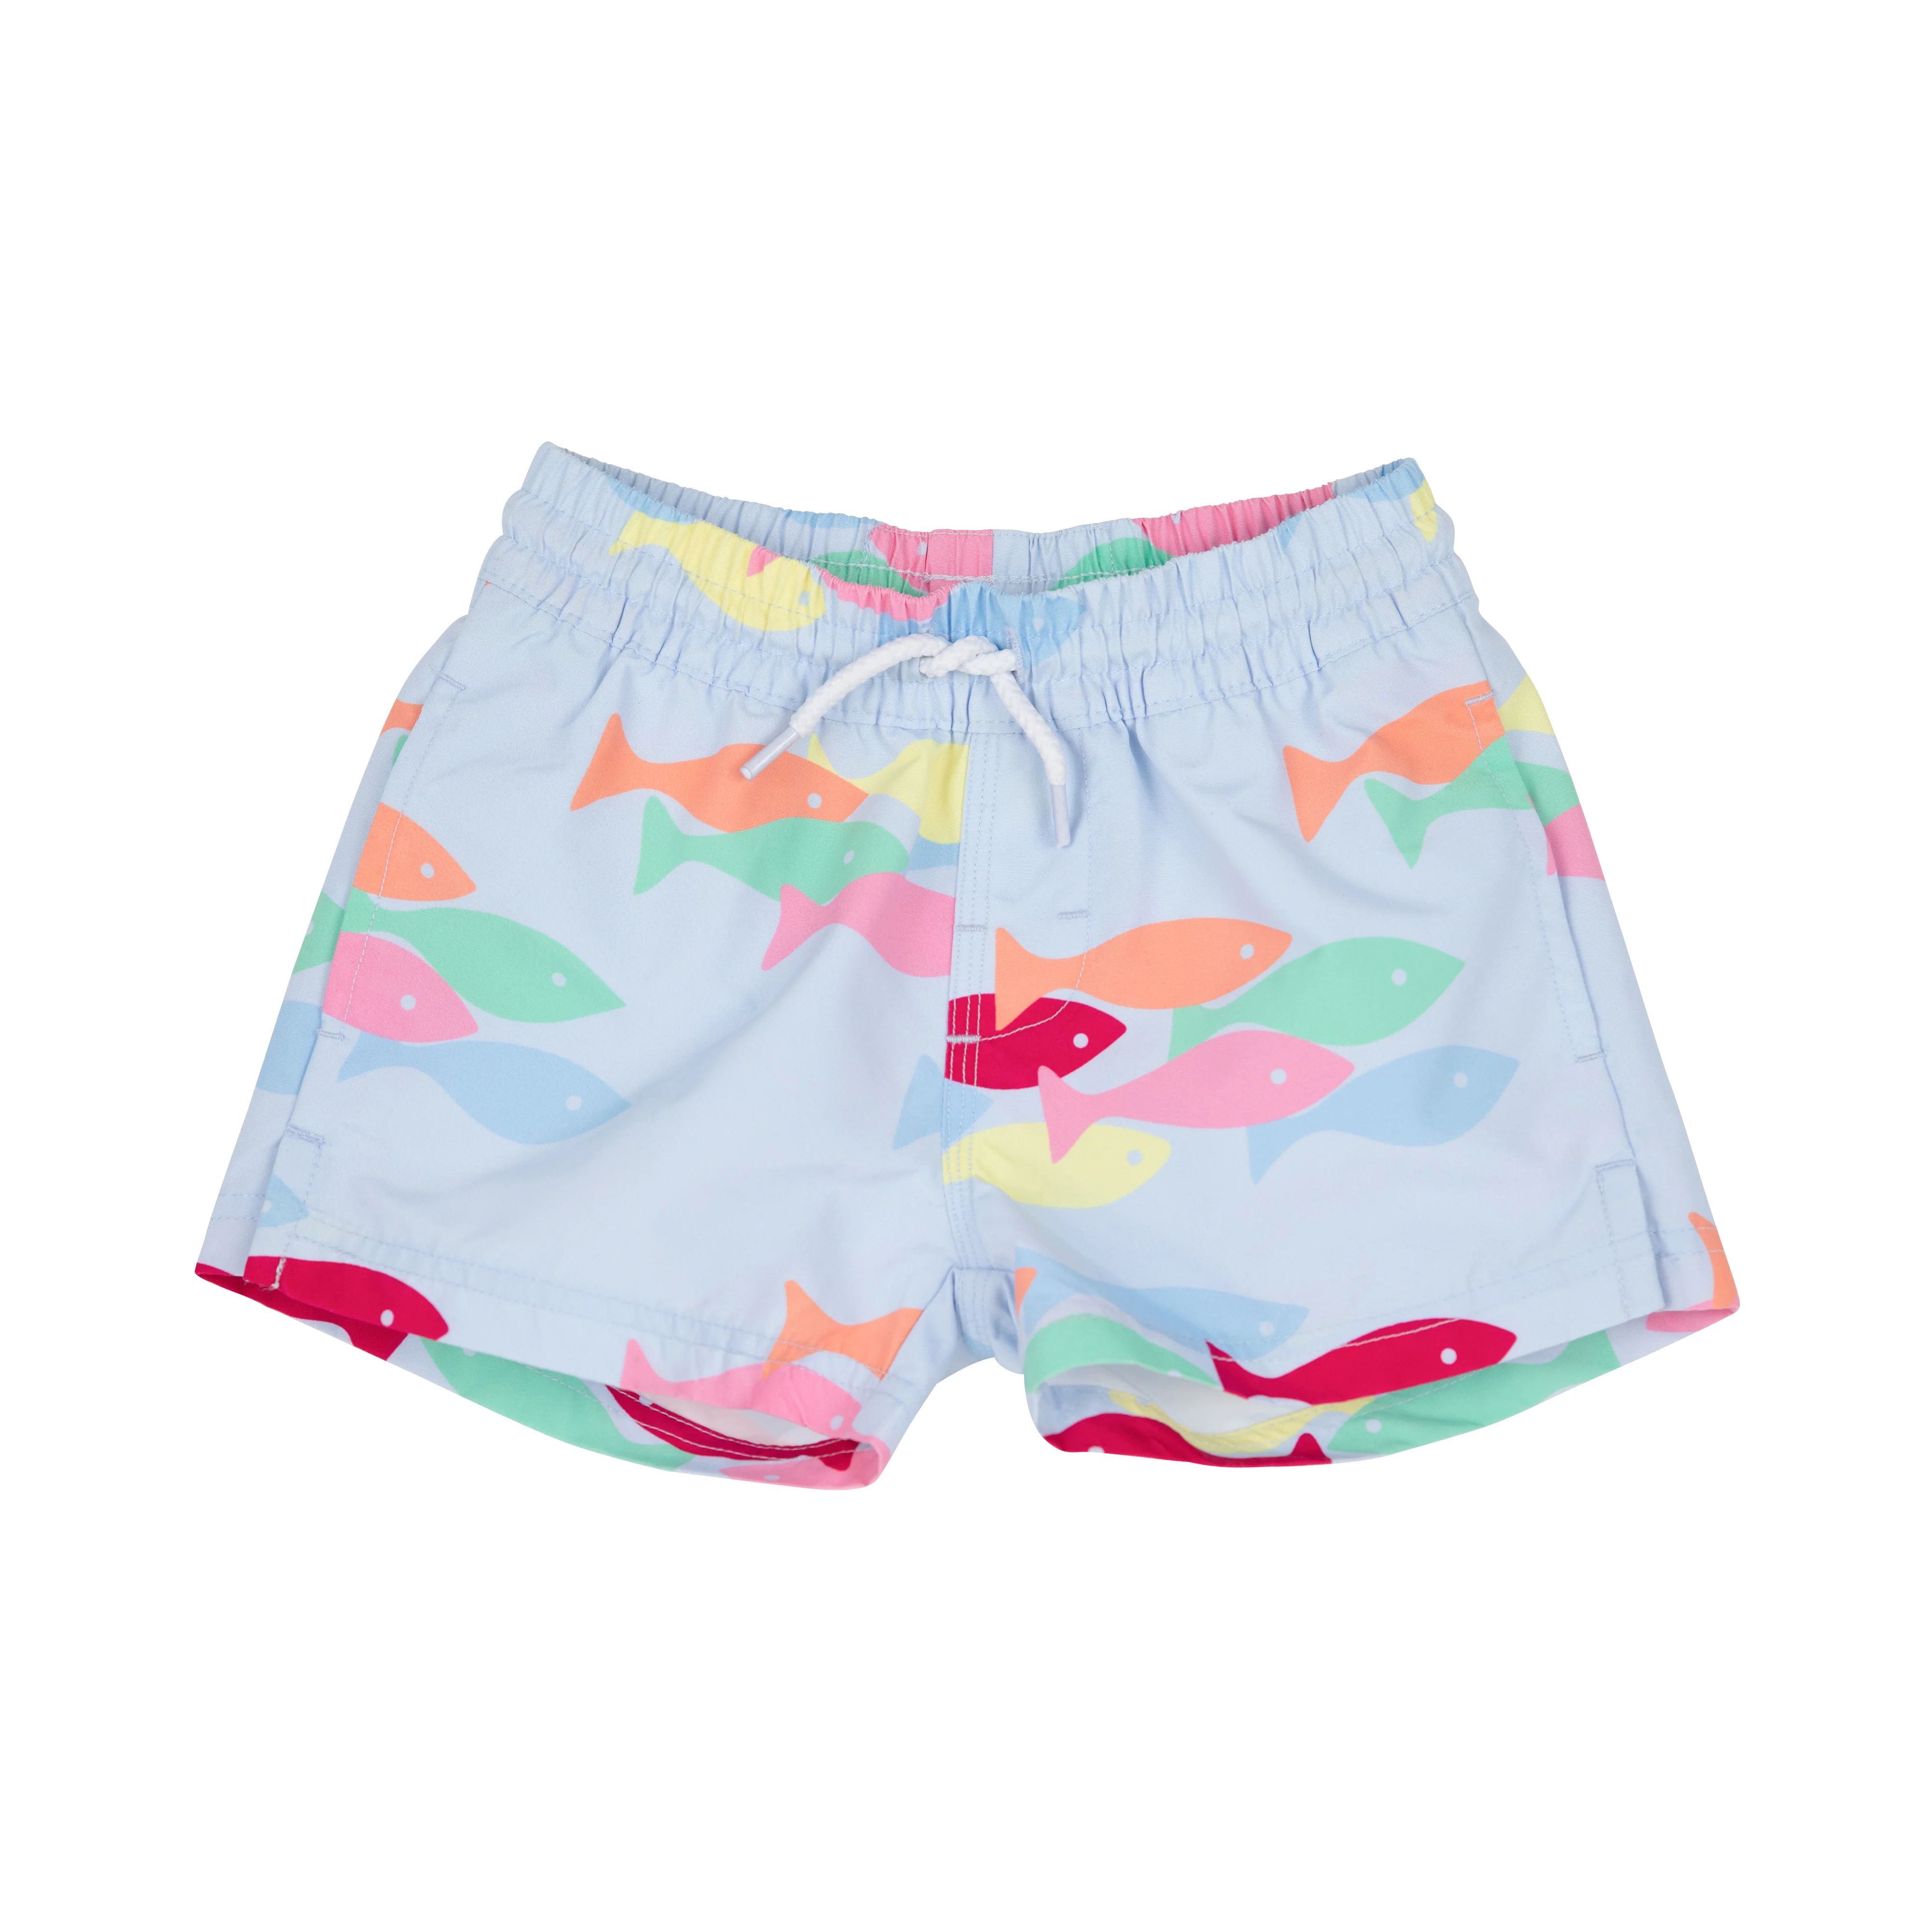 Tortola Swim Trunks - French Leave Fishies with Worth Avenue White | The Beaufort Bonnet Company